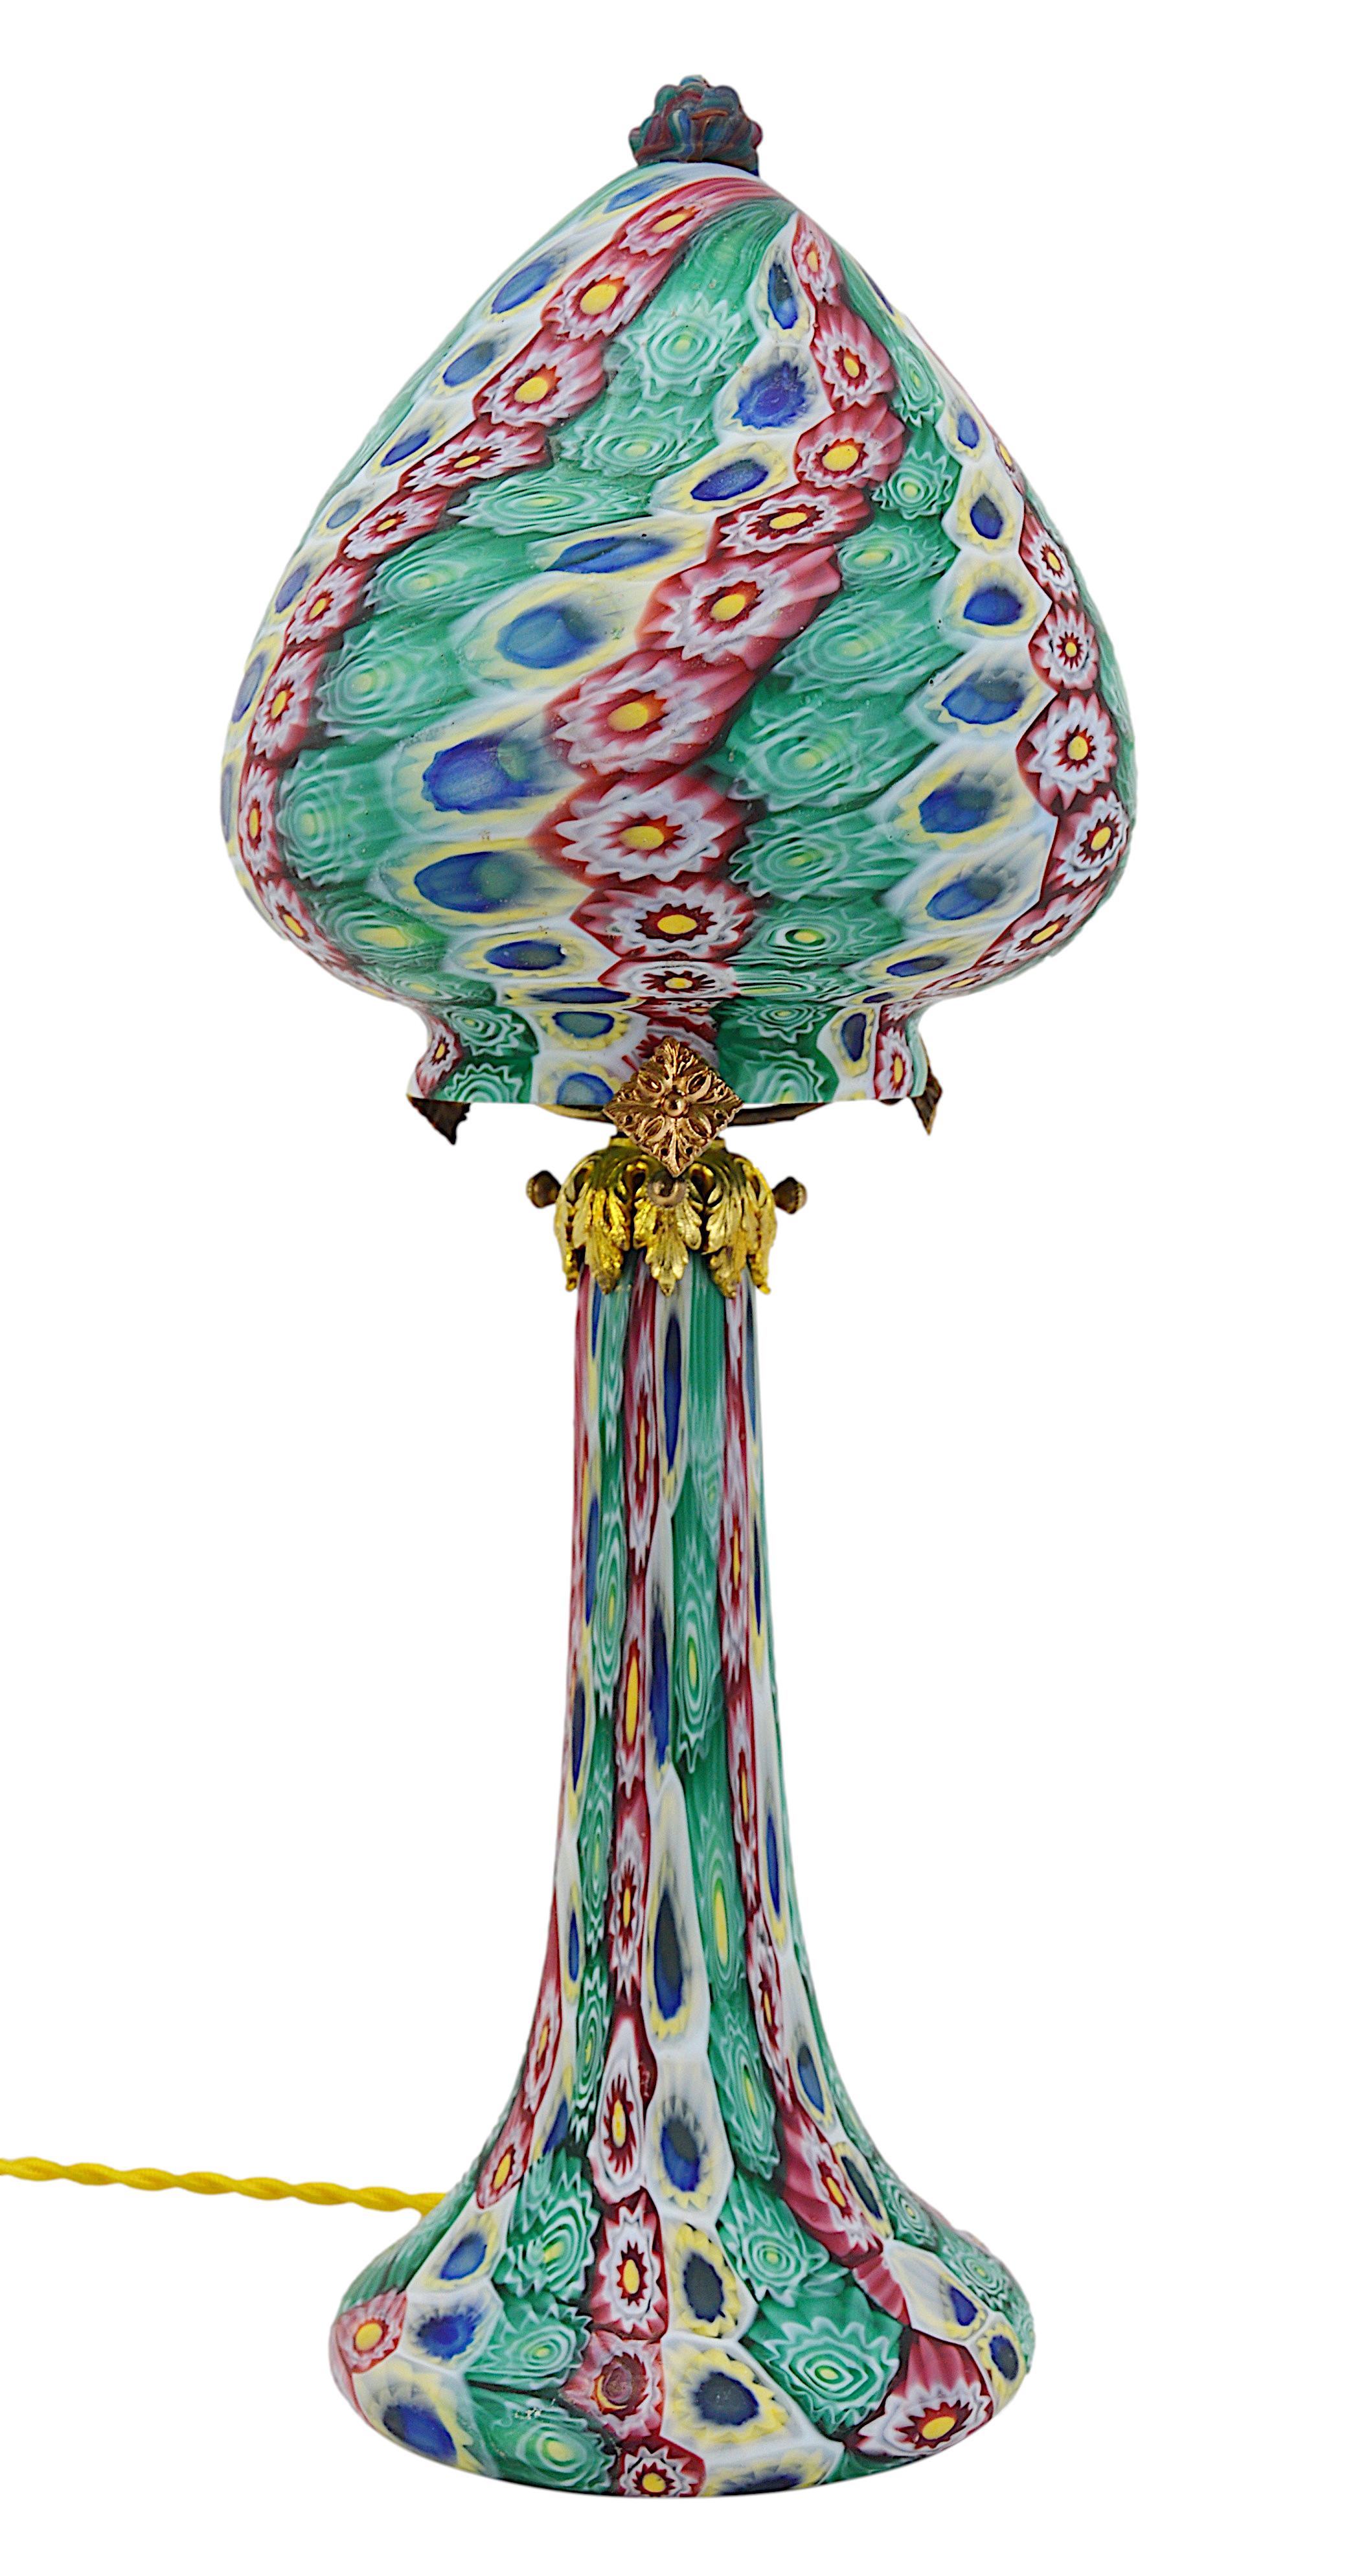 Table lamp / night-light by Fratelli Toso, Venice, Italy, ca.1900. Murrine and bronze. Height : 14.9